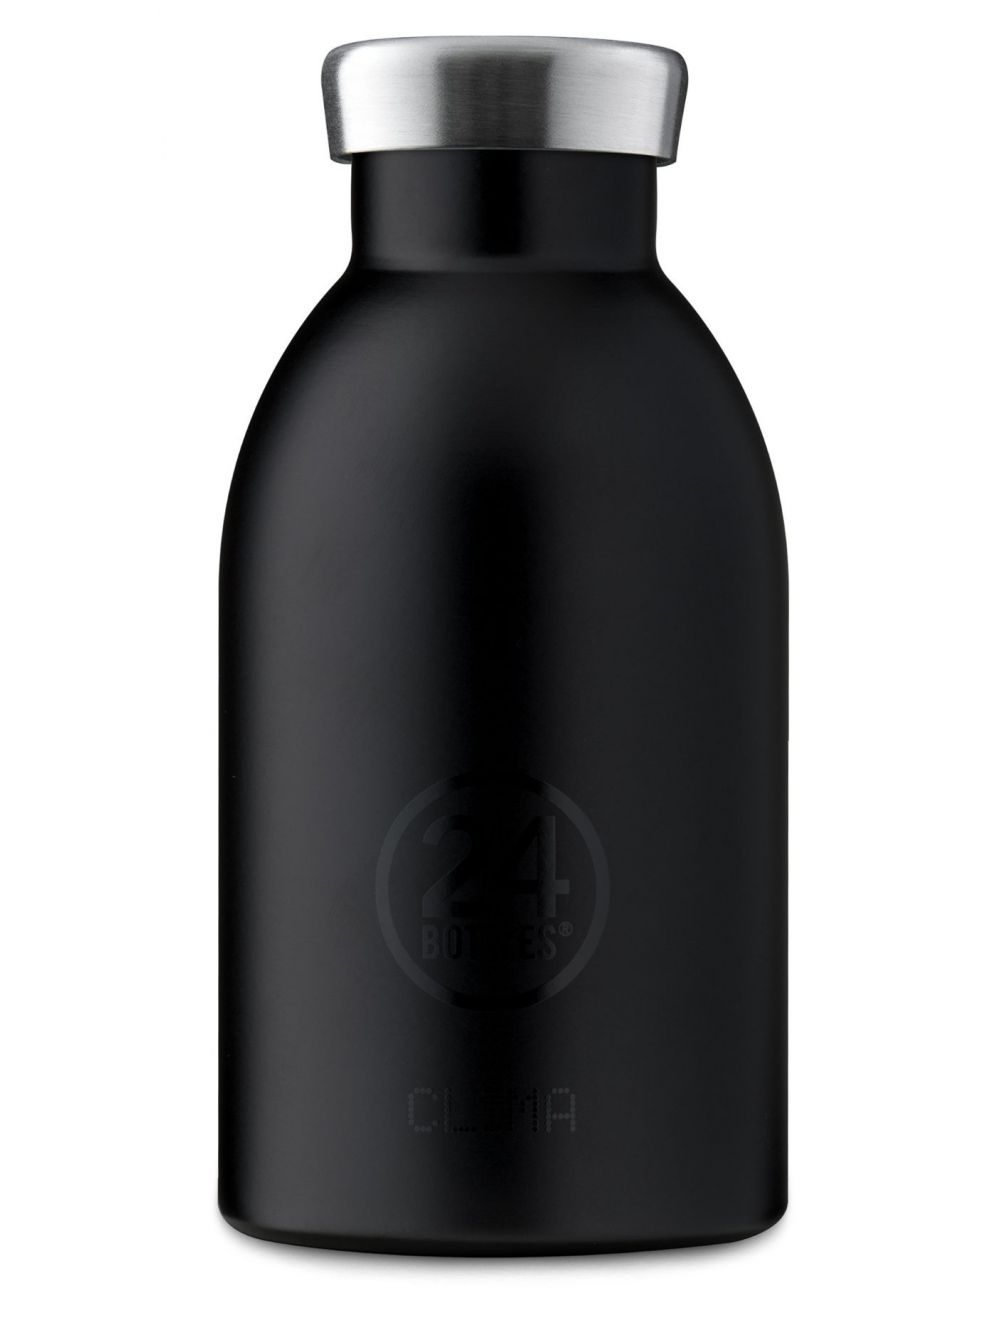 CLIMA Insulated Stainless Steel Water Bottle 330 ml -24B-C-330-BLK